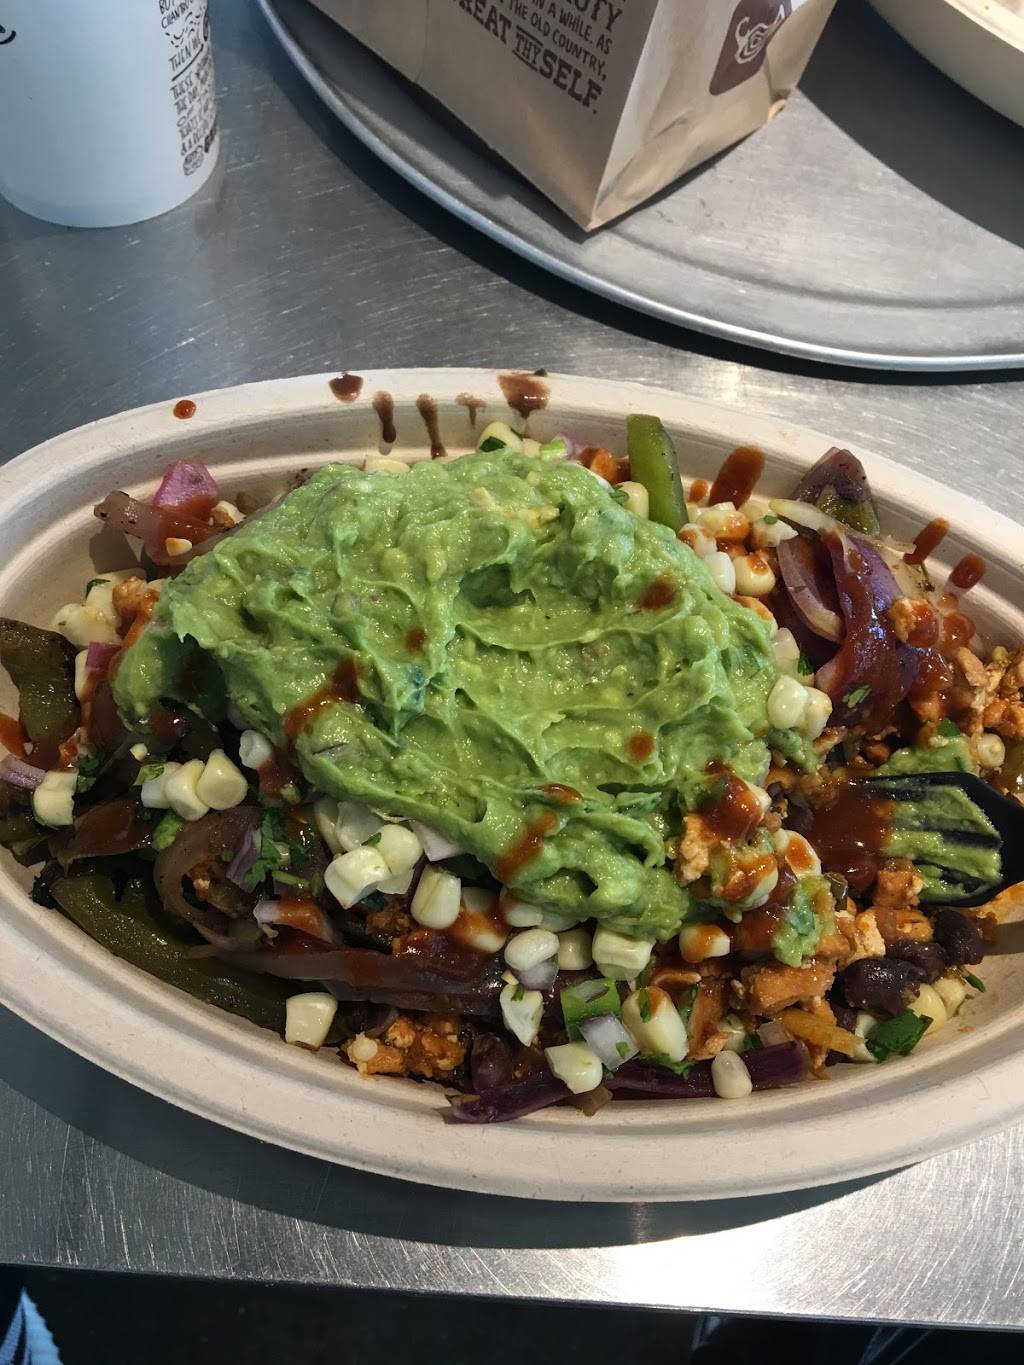 Chipotle Mexican Grill | restaurant | 435 Walt Whitman Rd, Huntington Station, NY 11747, USA | 6314230127 OR +1 631-423-0127